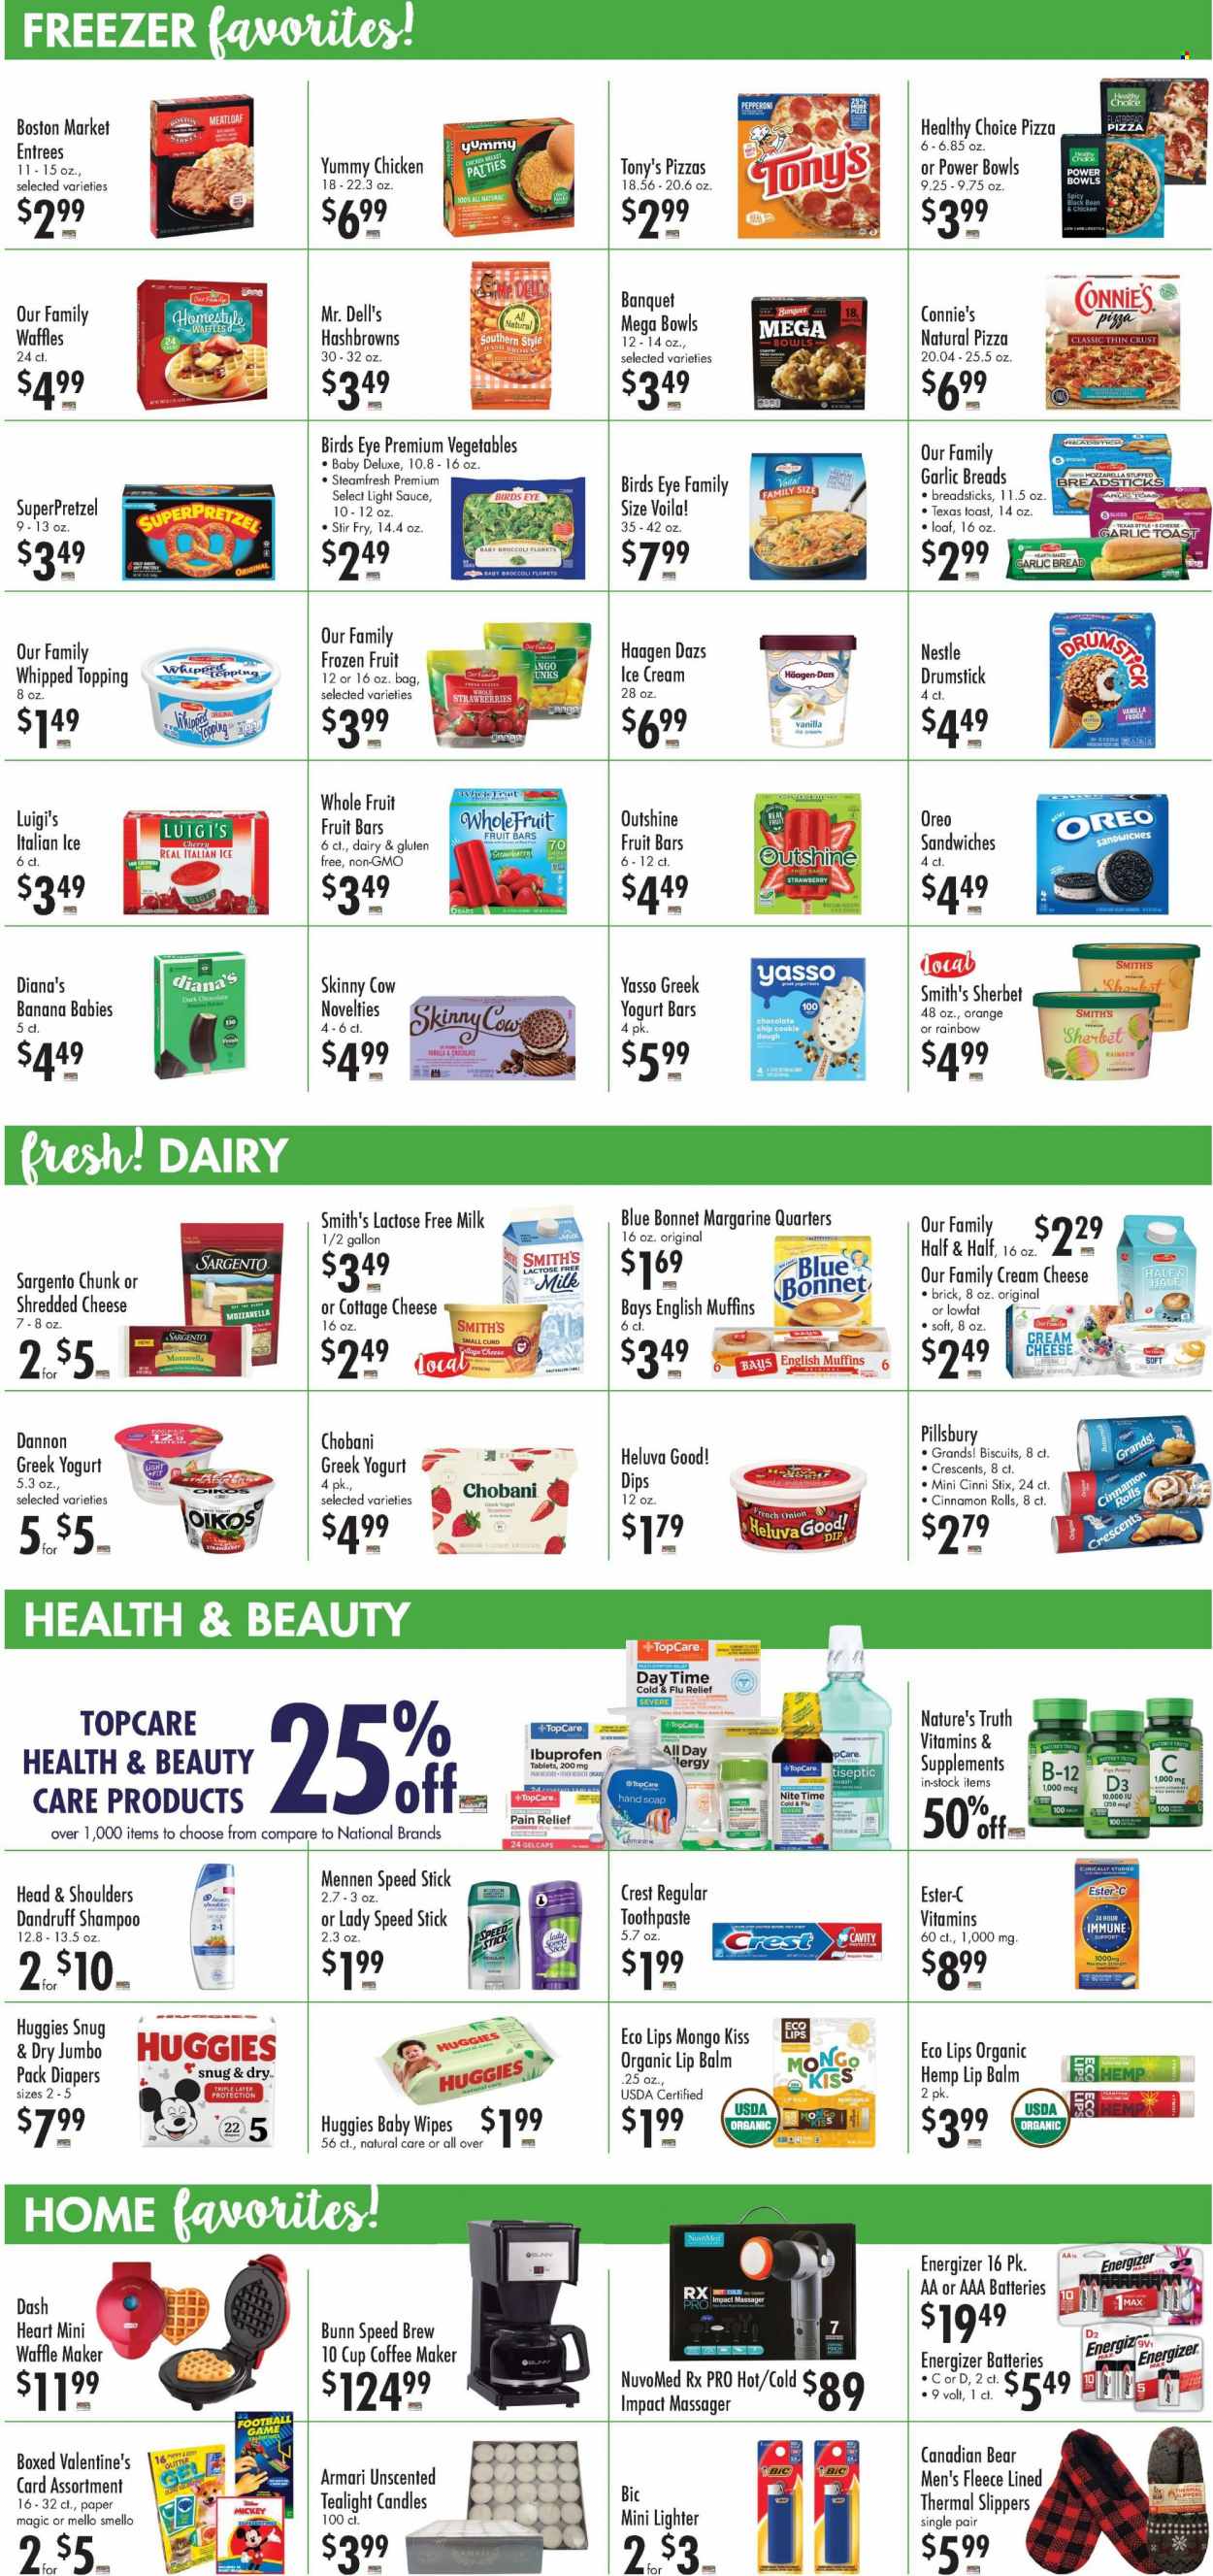 thumbnail - Buehler's Flyer - 02/01/2023 - 02/07/2023 - Sales products - bread, english muffins, flatbread, cinnamon roll, waffles, broccoli, cherries, oranges, pizza, sandwich, Pillsbury, meatloaf, Bird's Eye, Healthy Choice, pepperoni, cottage cheese, shredded cheese, Sargento, greek yoghurt, Oreo, Oikos, Chobani, Dannon, milk, lactose free milk, margarine, dip, sherbet, Mickey Mouse, Häagen-Dazs, hash browns, SuperPretzel, fudge, Nestlé, biscuit, dark chocolate, bread sticks, Smith's, topping, honey, chicken breasts, wipes, Huggies, baby wipes, nappies, shampoo, hand soap, soap, toothpaste, Crest, lip balm, Head & Shoulders, Speed Stick, Mum, BIC, cup, candle, tealight, battery, Energizer, AAA batteries, Cold & Flu, Ester-c, Nature's Truth, Ibuprofen, pain relief, vitamin D3, Half and half. Page 3.